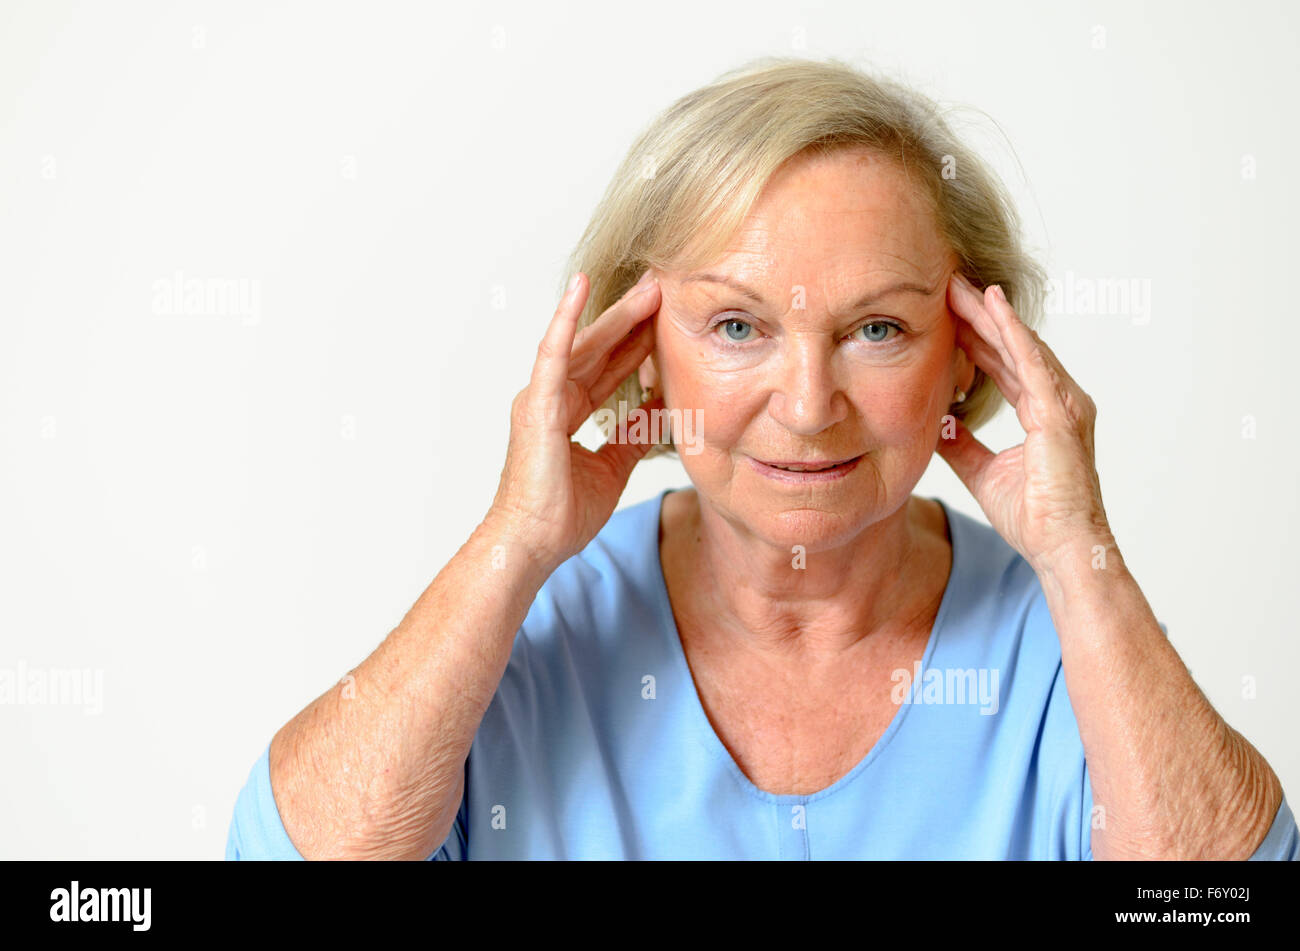 Senior woman wearing blue shirt while showing her face, effect of aging caused by loss of elasticity, close-up Stock Photo